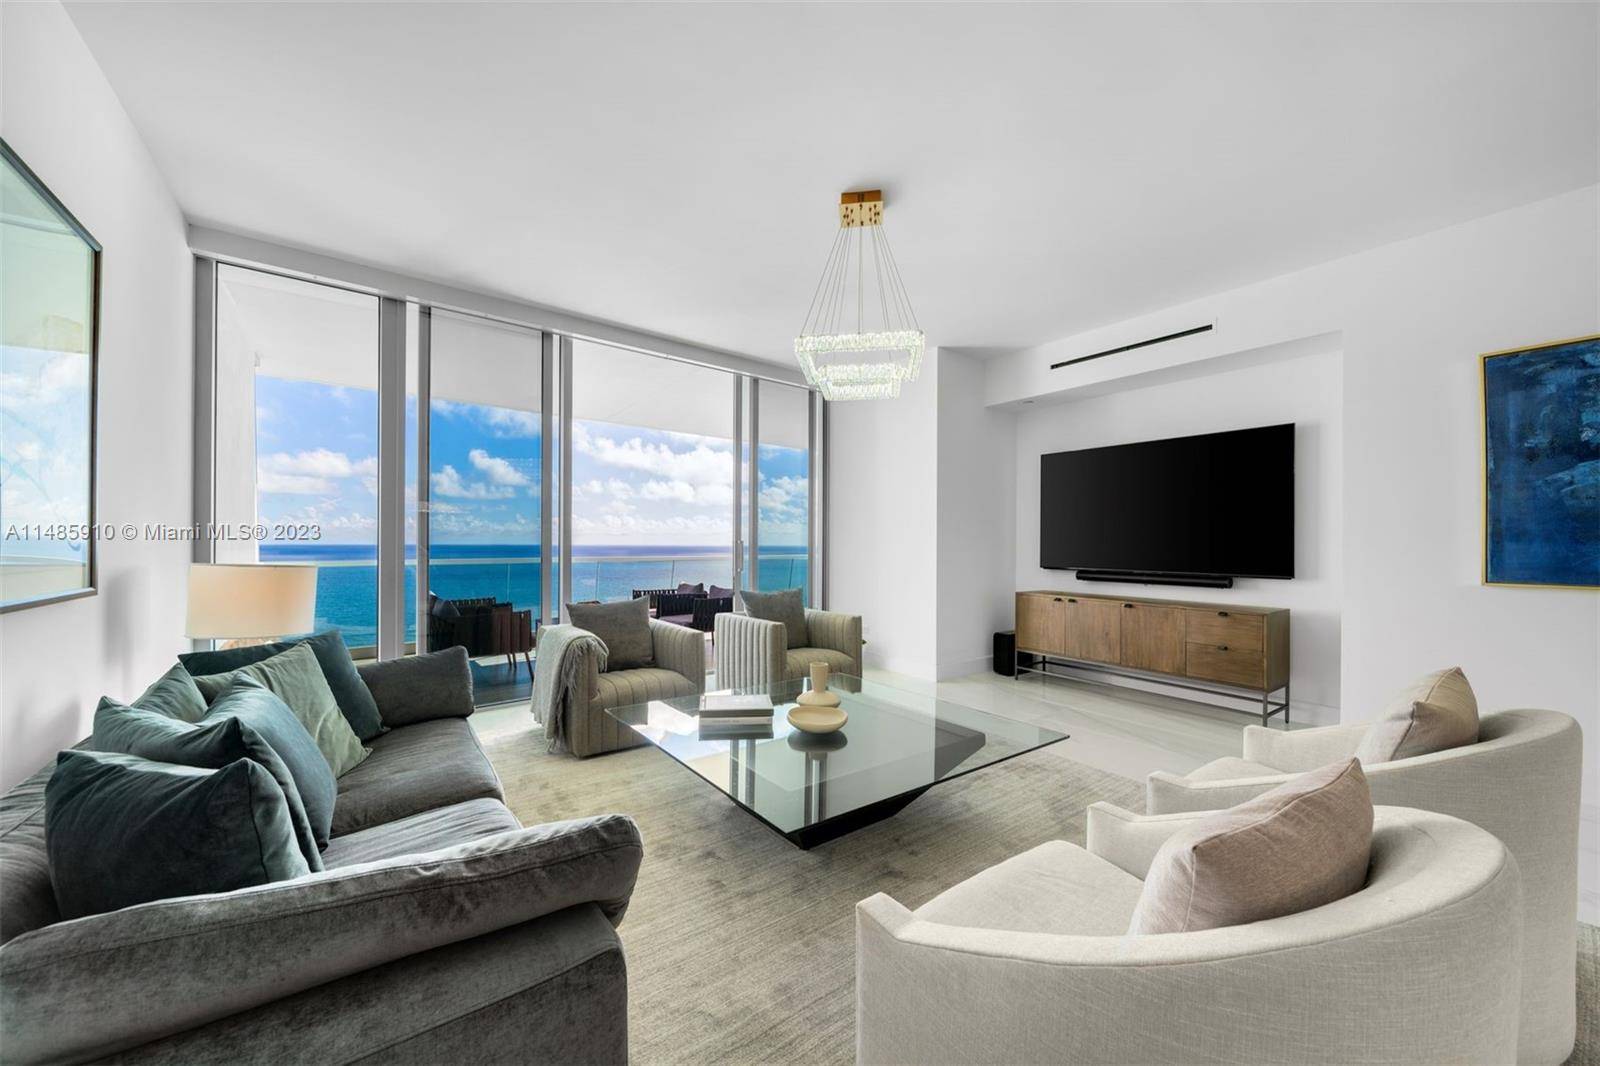 Enjoy direct, unobstructed views of the ocean and Intracoastal from this exquisite, turnkey unit at Turnberry Ocean Club.